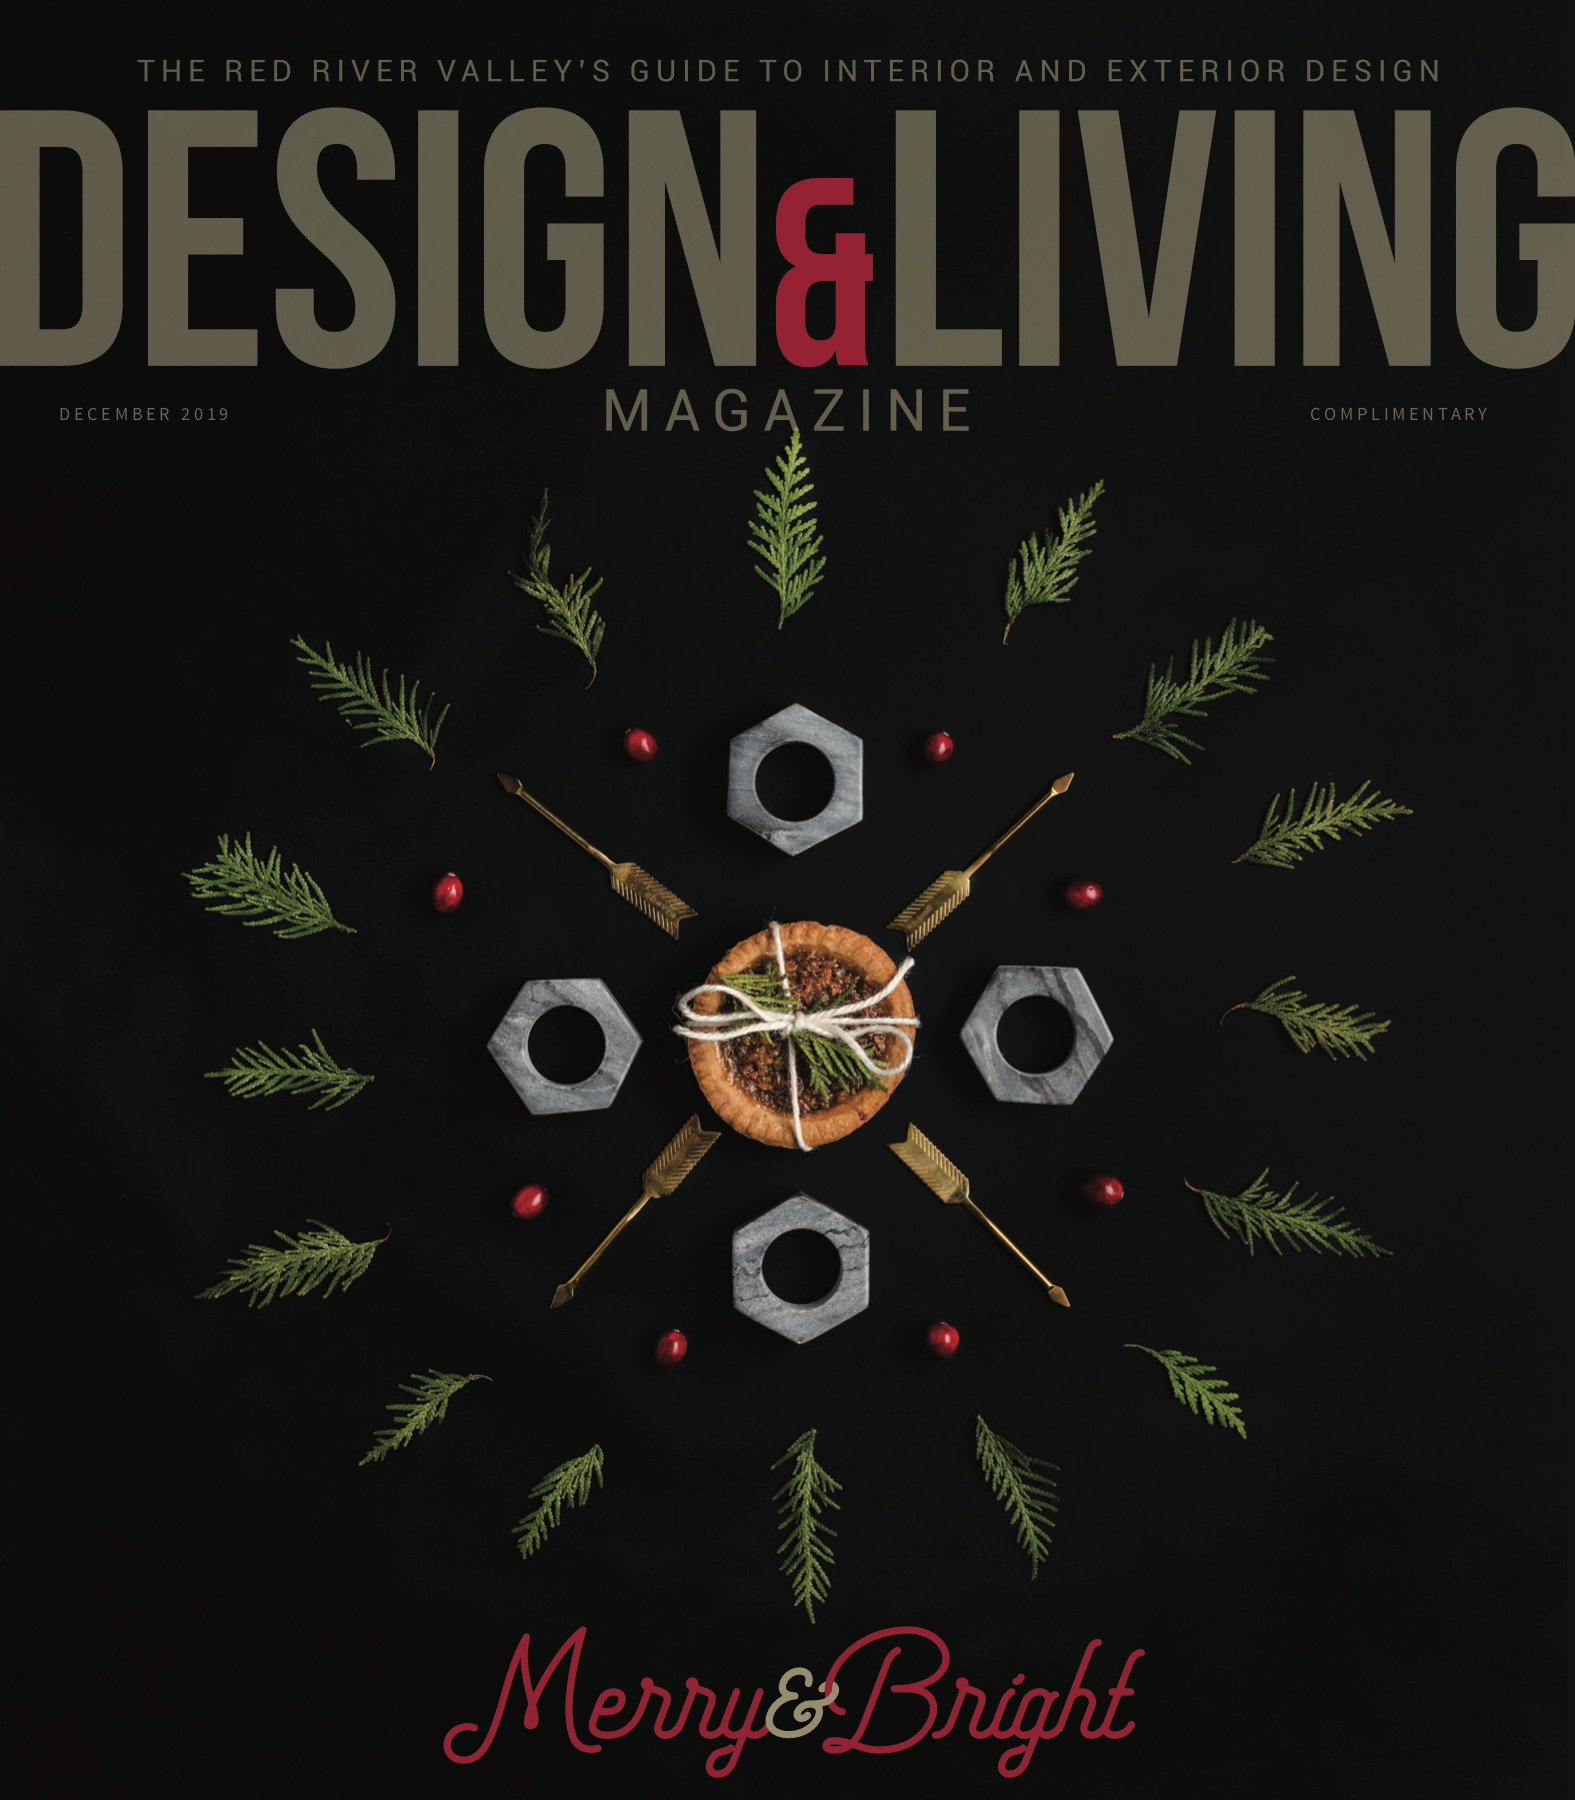 Strom Architecture | To New Beginnings | Design and Living Magazine